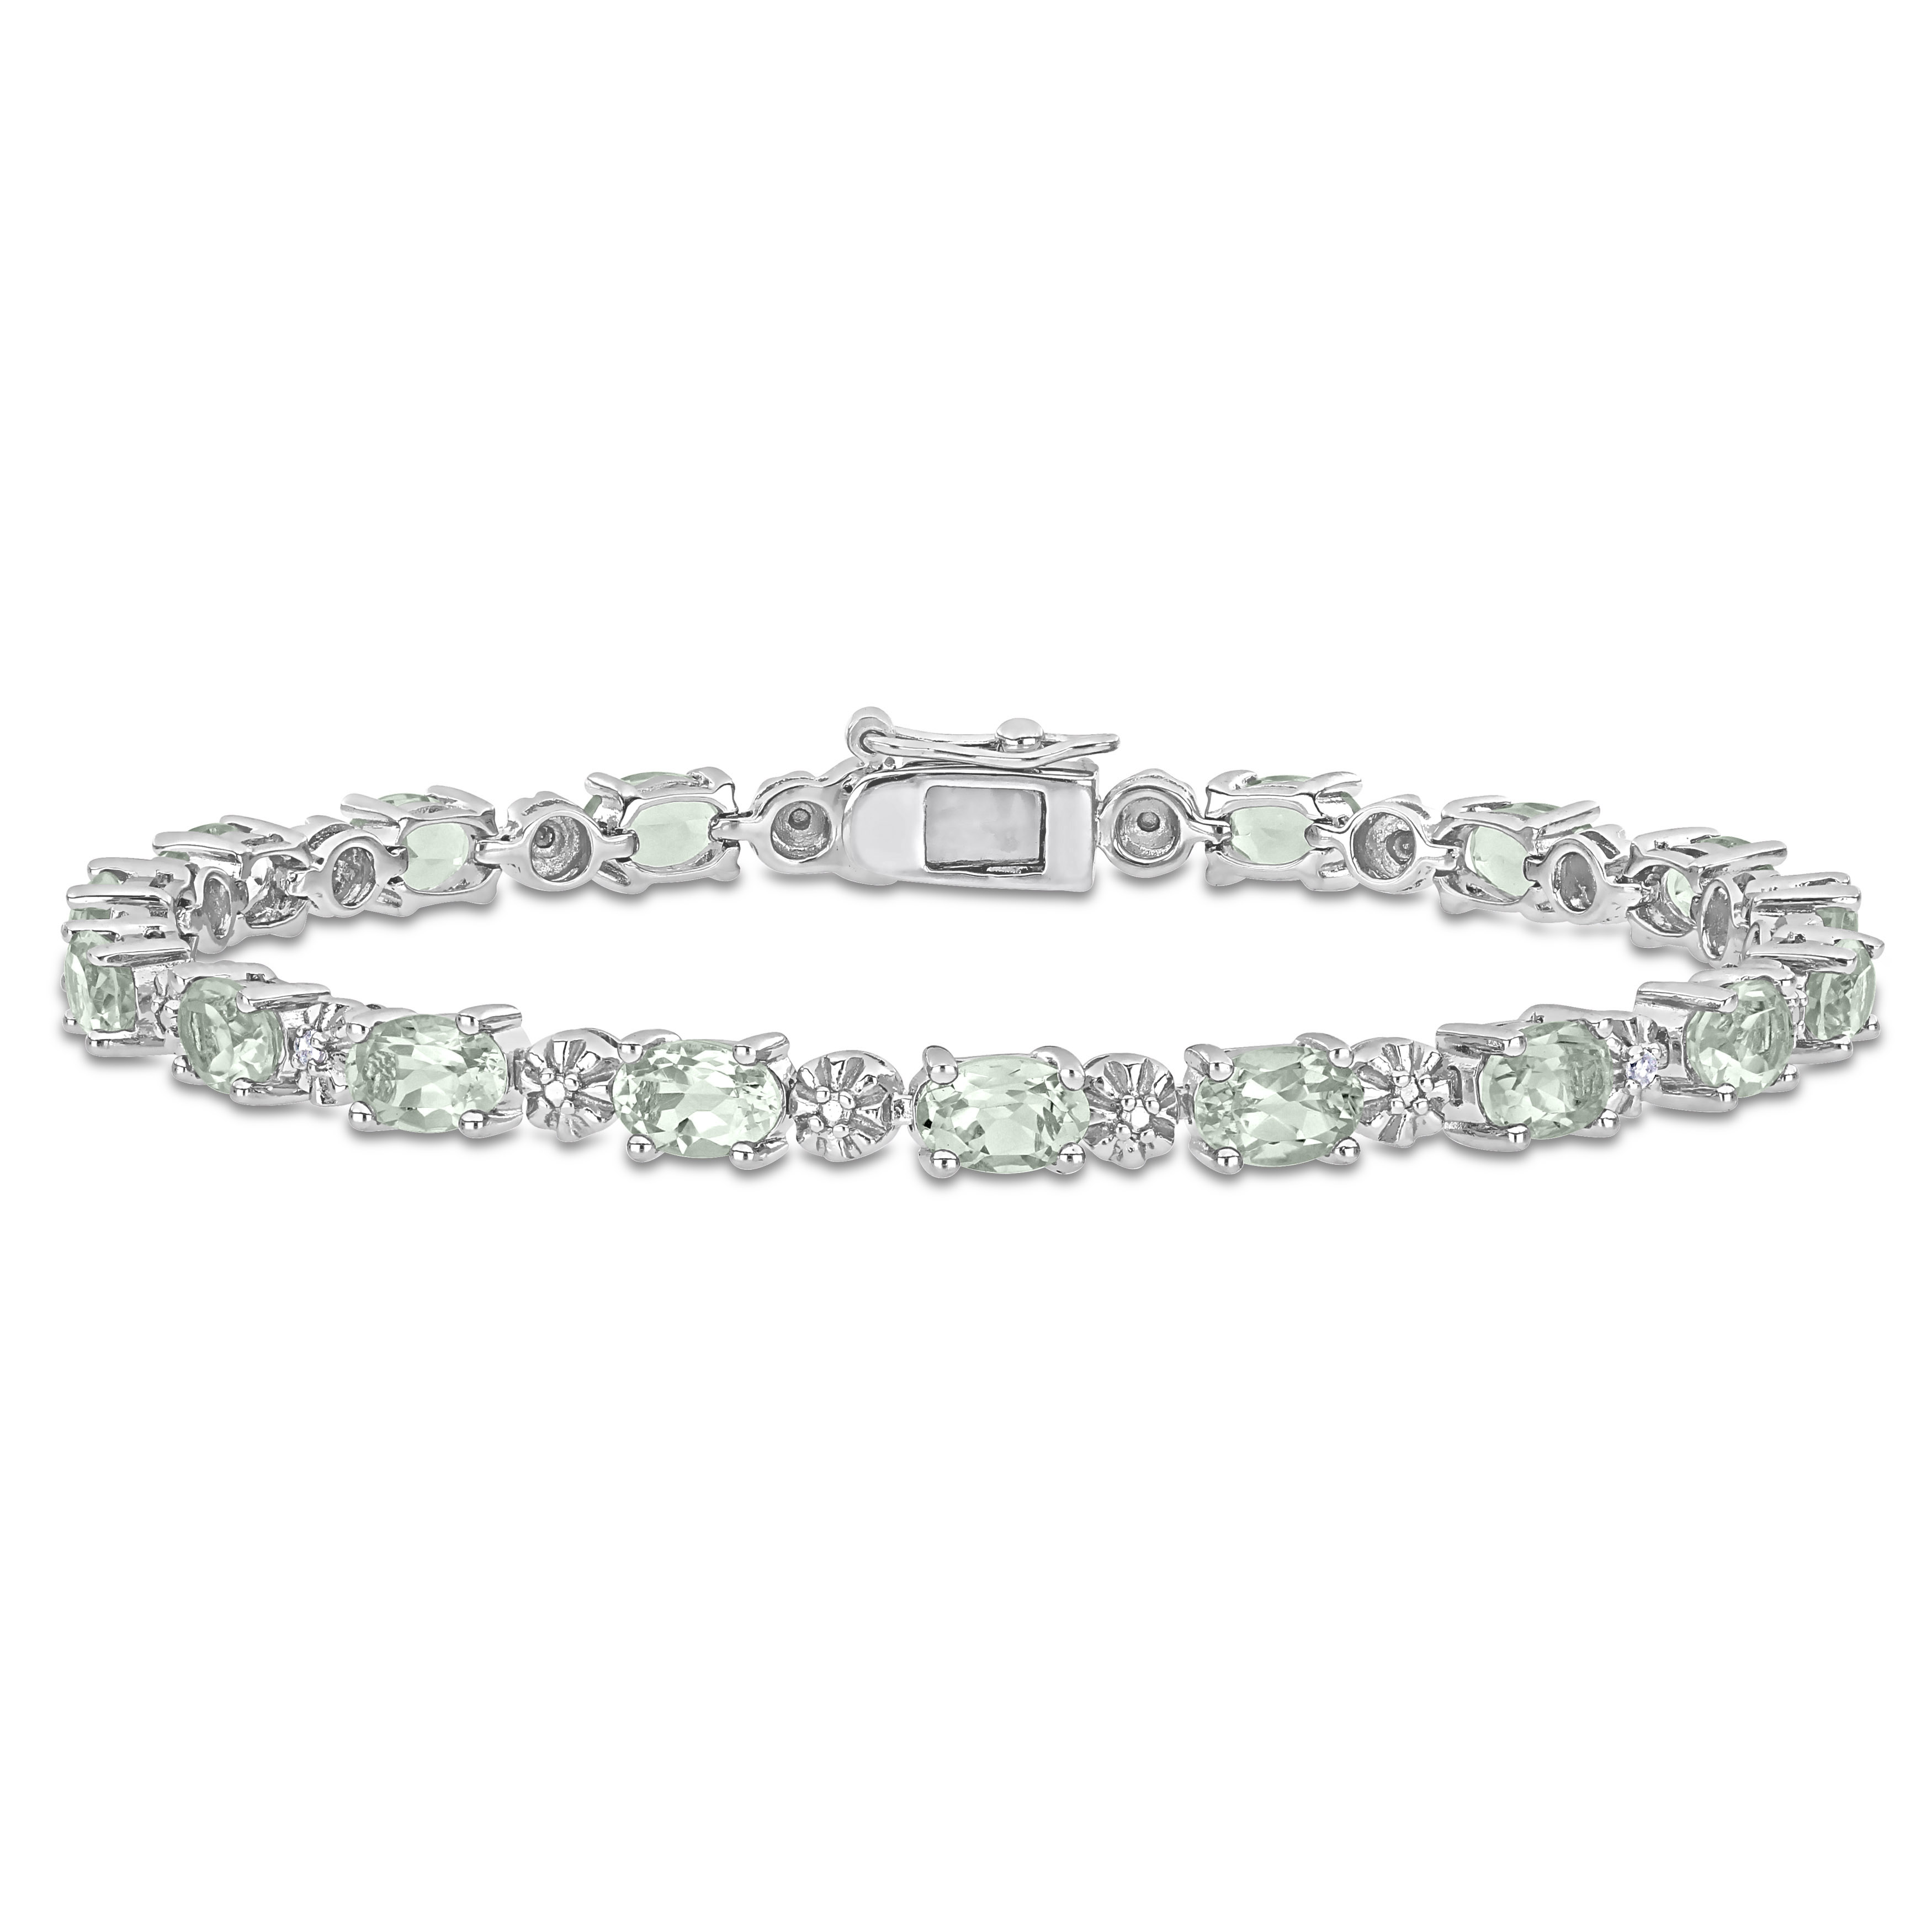 7 3/8 CT TGW Green Quartz and Diamond Accent Tennis Bracelet in Sterling Silver - 7.25 in.